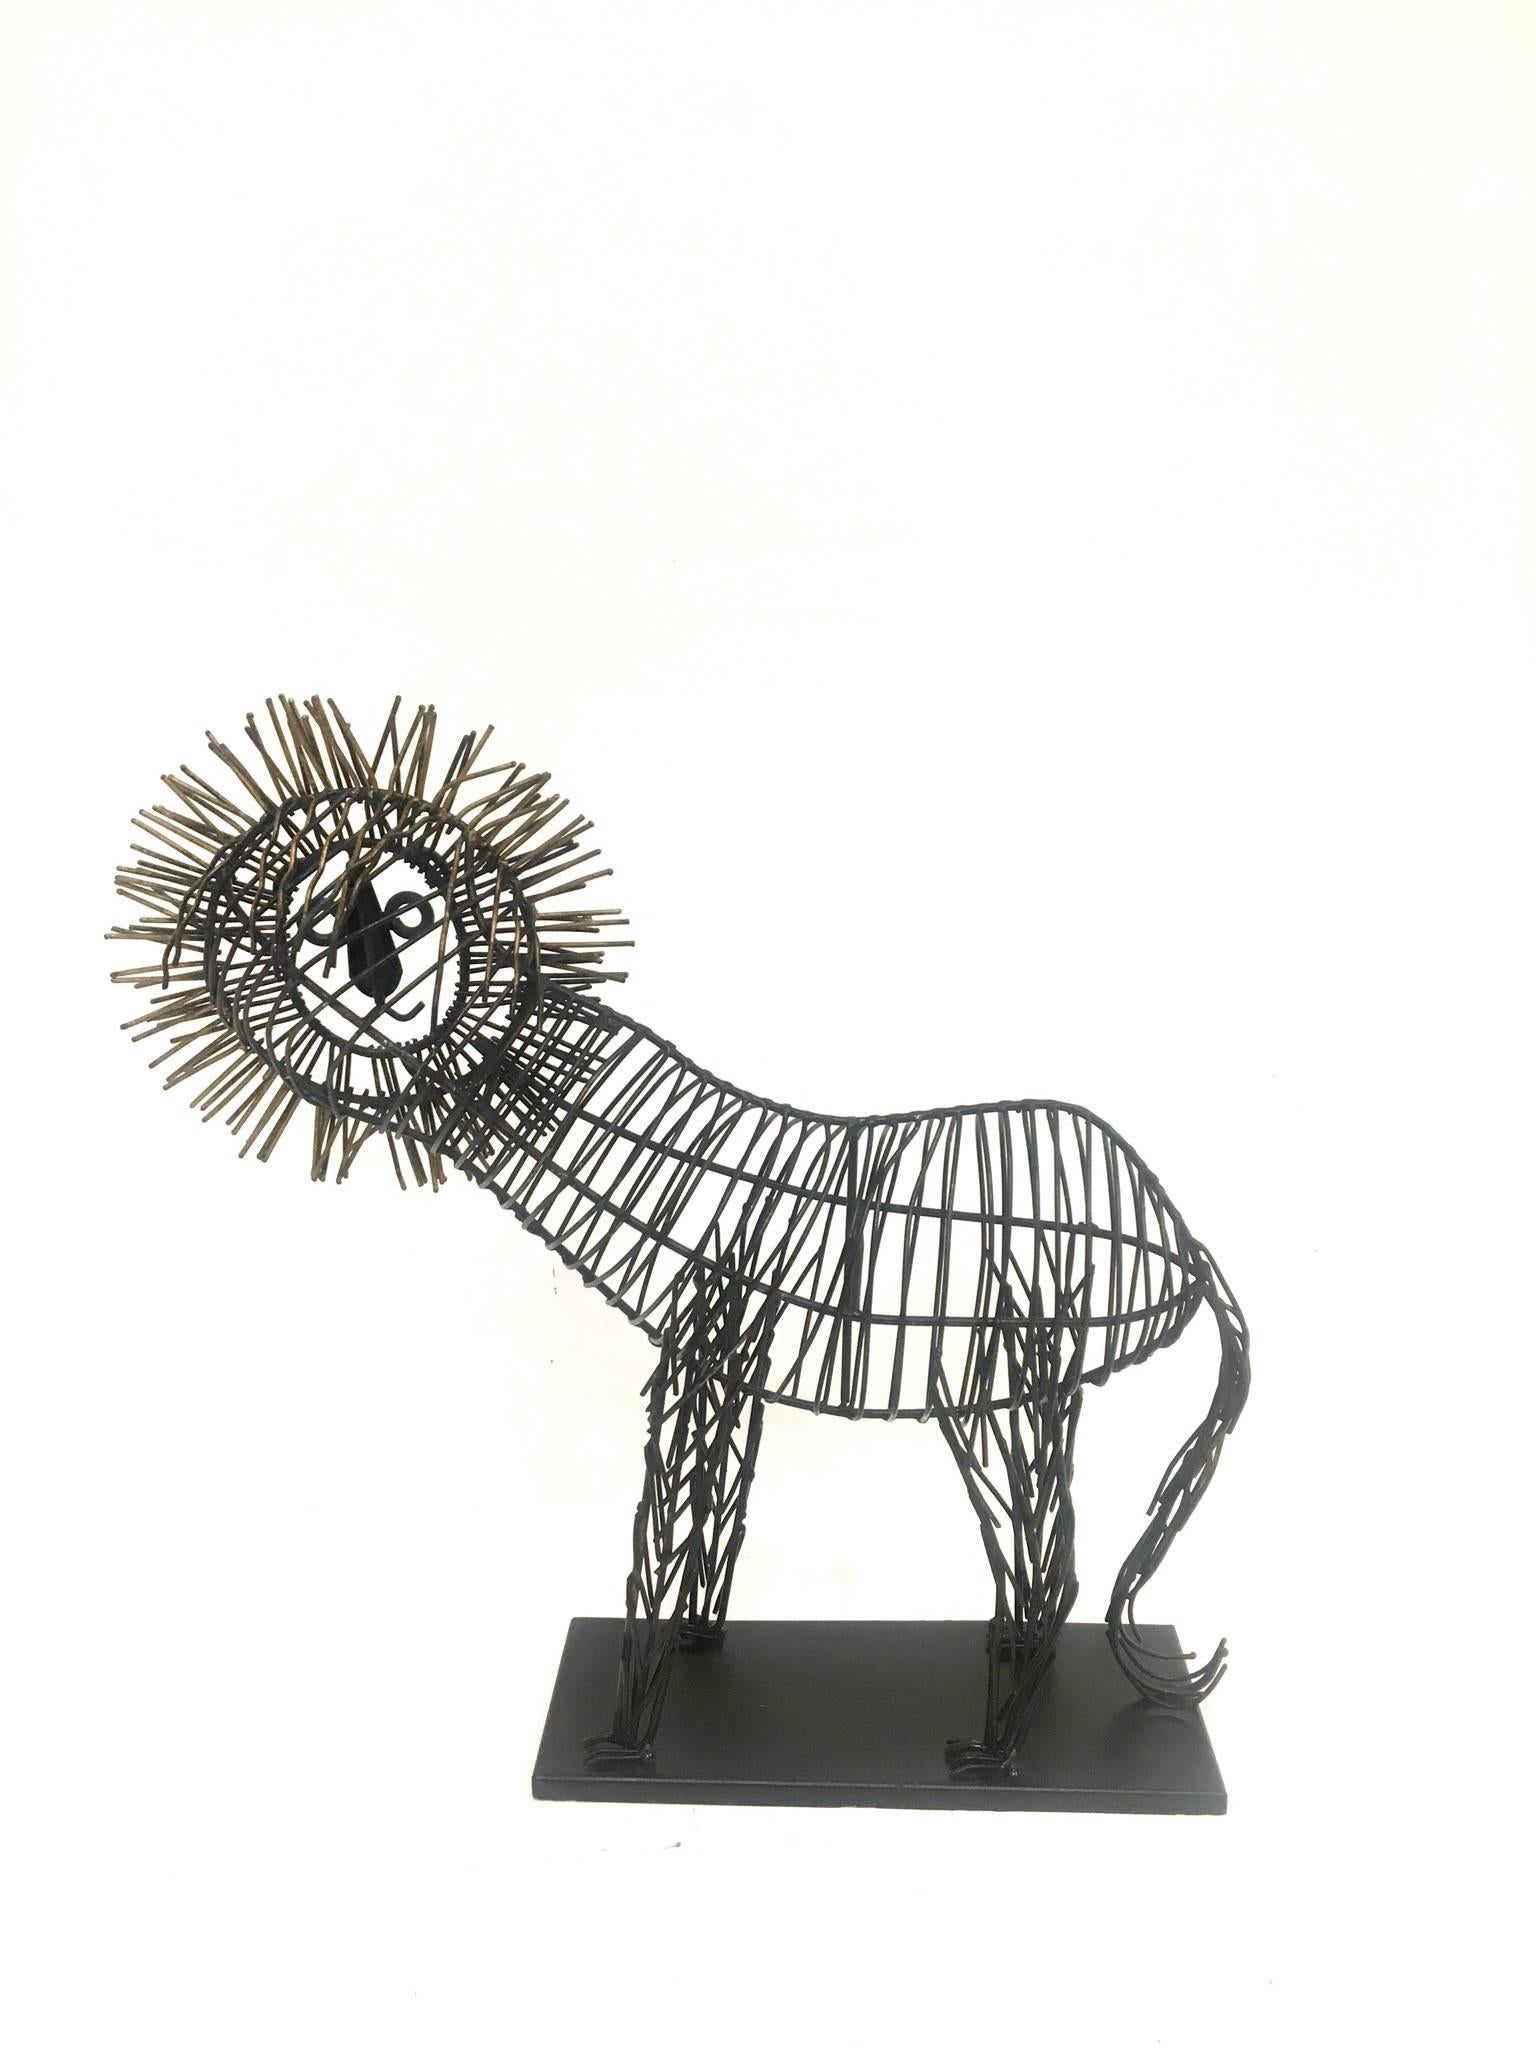 Fun, metal wire sculpture of a male lion sitting on a black metal base. The body is black metal wire and the mane is tinted in gold. The piece is unsigned but in the style of C. Jere, circa the 1980s. Sergio.